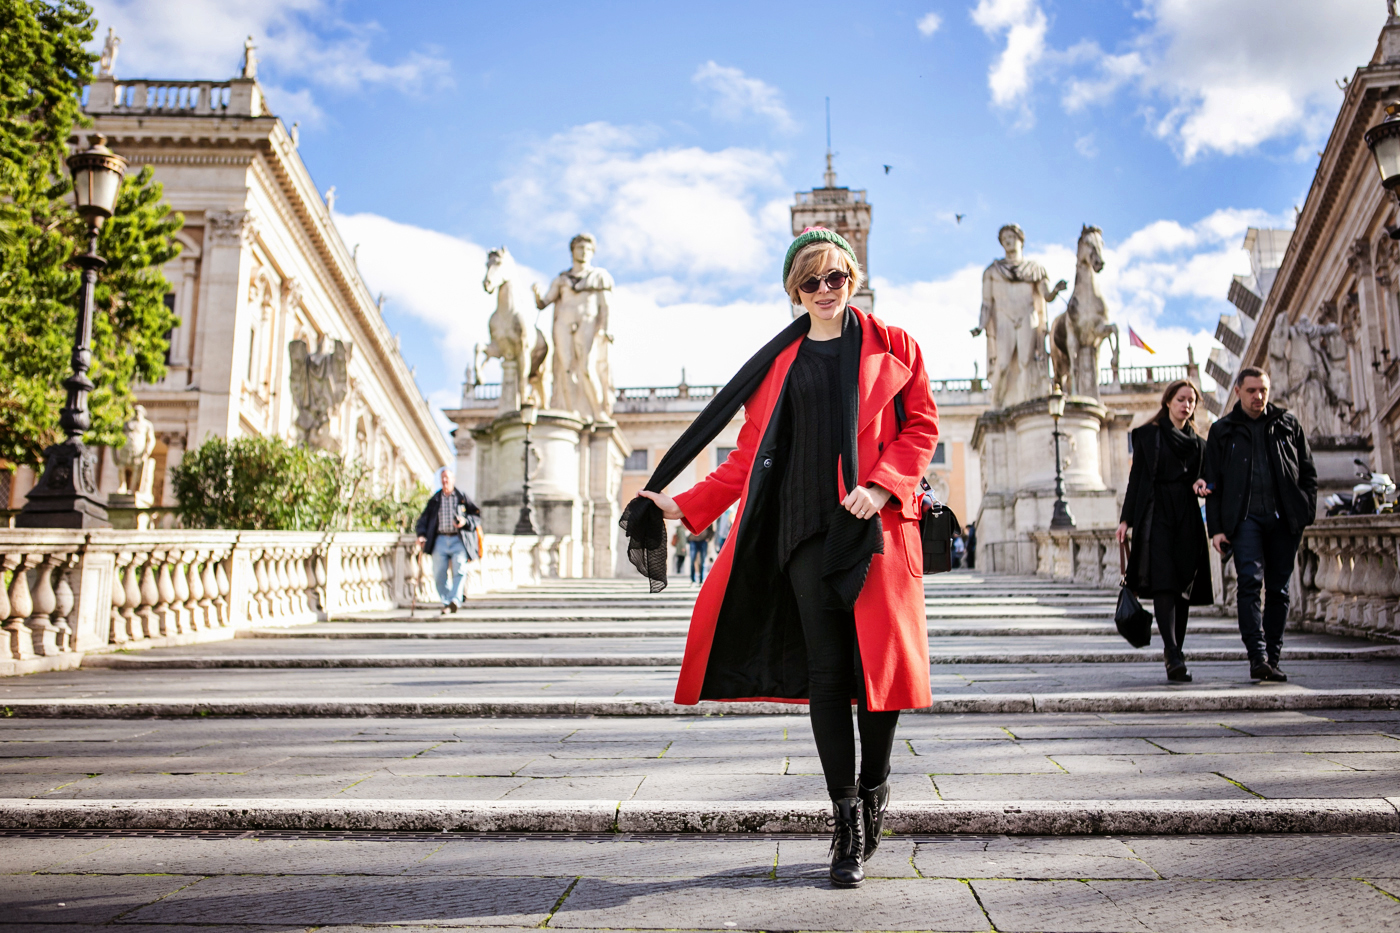 darya kamalova thecablook russian italian fashion bogger street style trend asos long red coat watermelon hat proenza schouler ps11 bag dr denim jeans rome roma centro storico le bunny blue booties italia italy-33